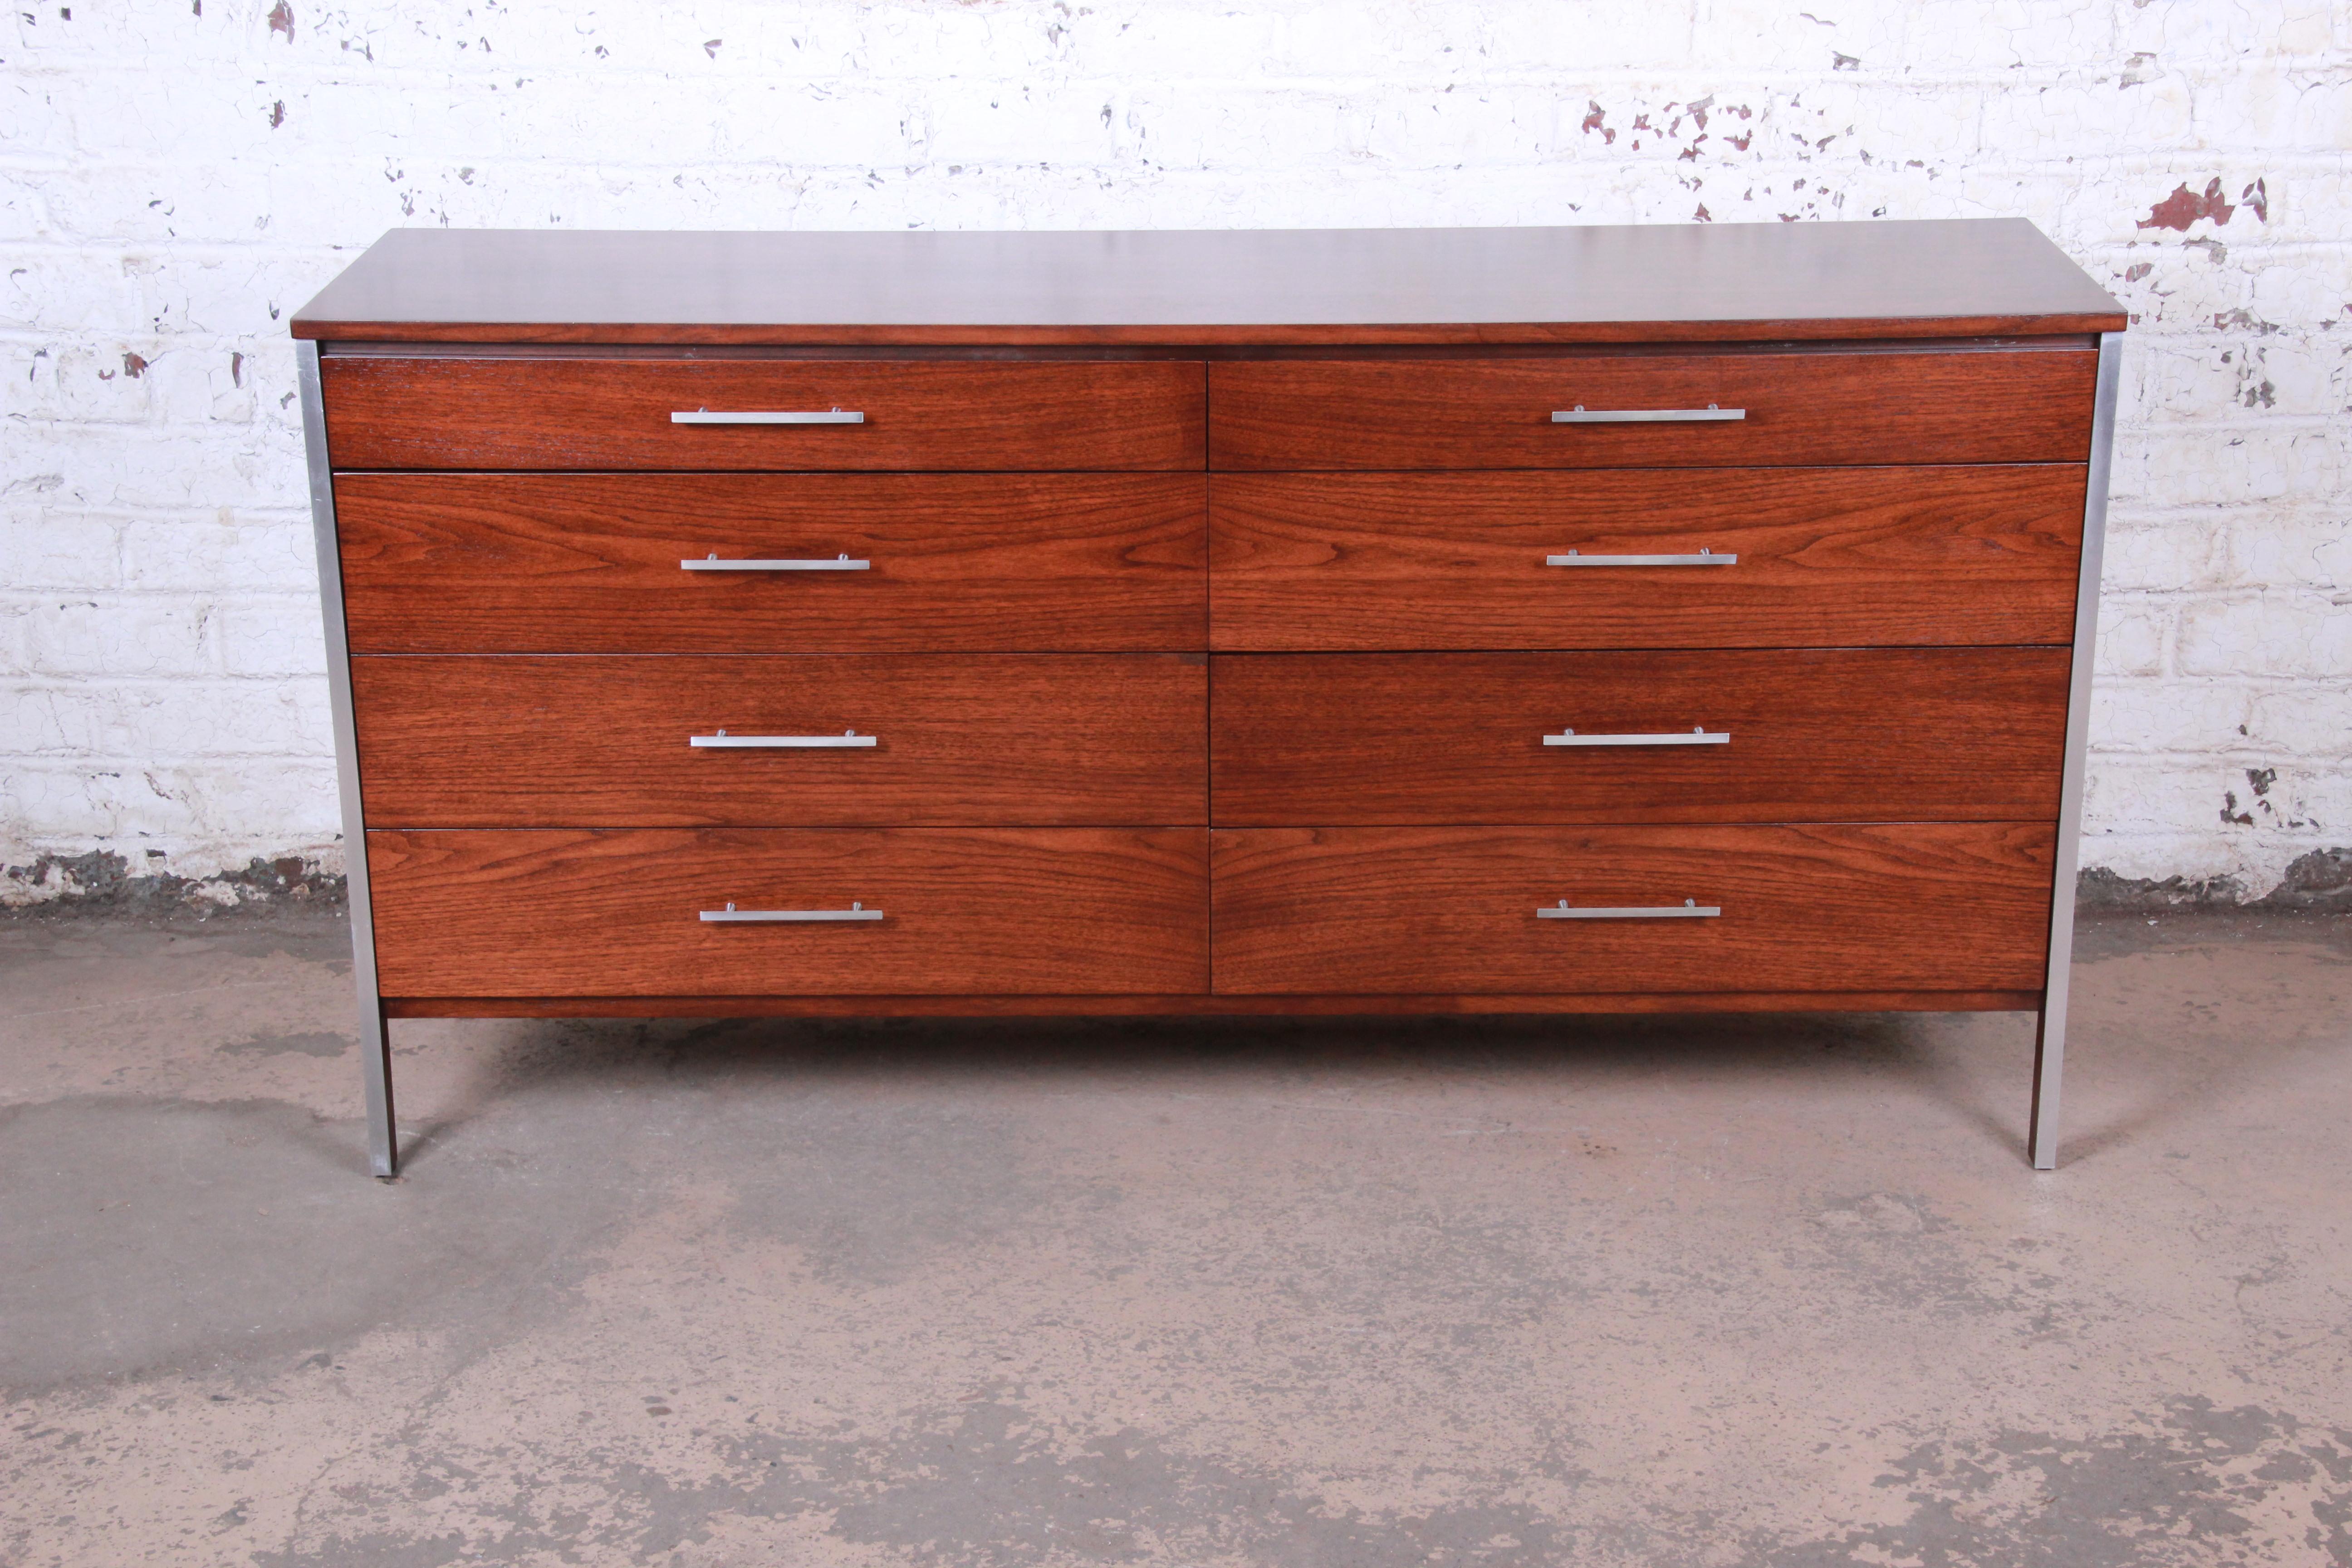 An exceptional Mid-Century Modern long dresser or credenza designed by Paul McCobb for Calvin Furniture. The dresser features gorgeous walnut wood grain with aluminum trim and hardware. It offers ample storage, with eight deep dovetailed drawers. An